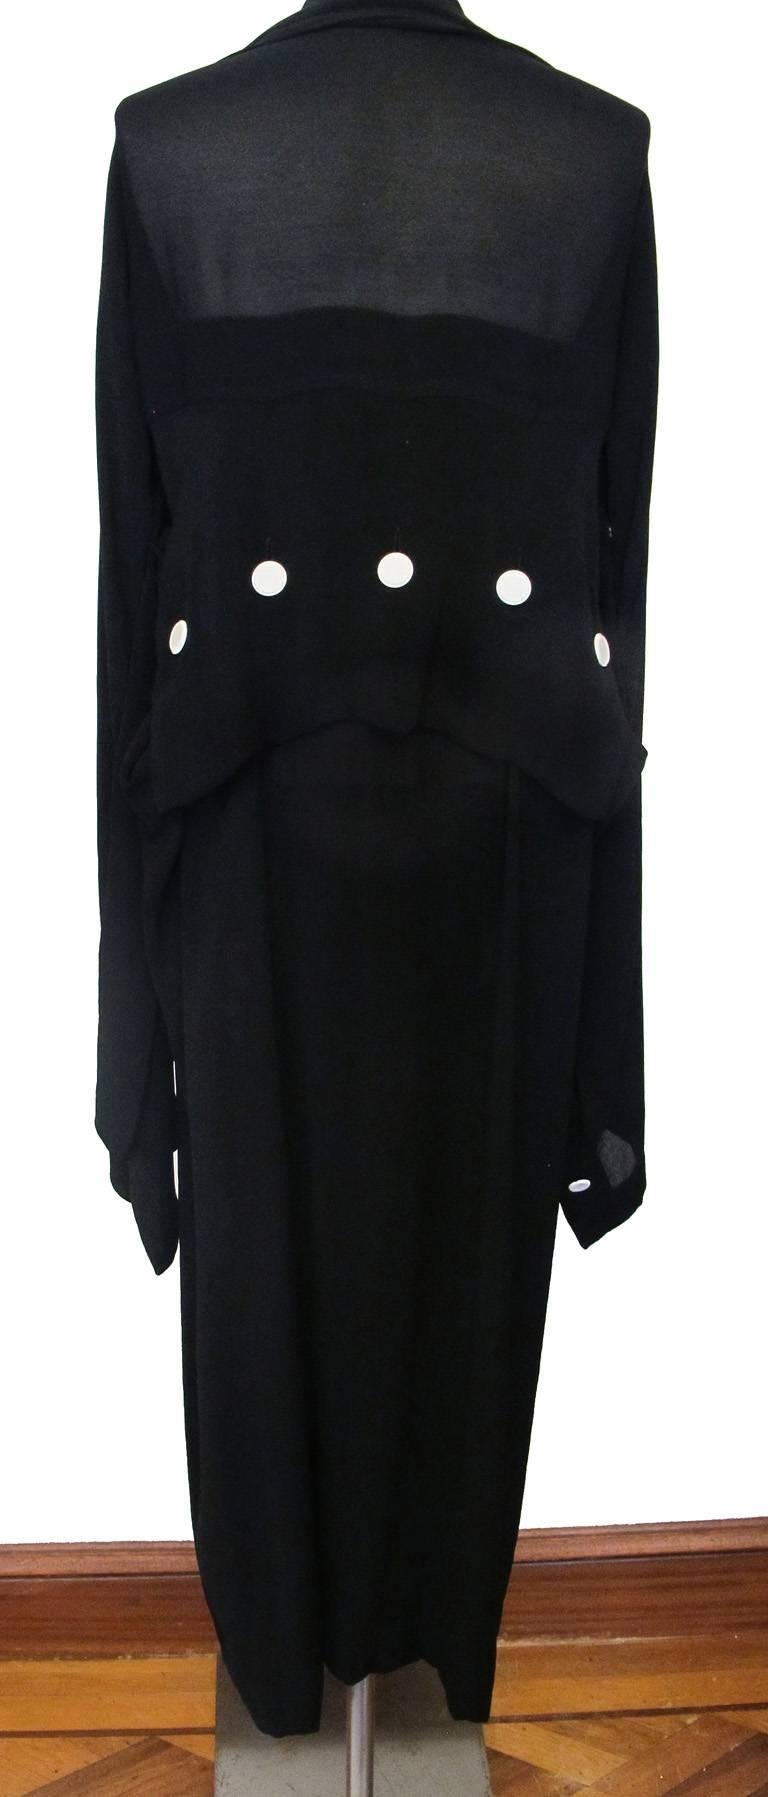 Yohji Yamamoto Long-Sleeved Black Dress with White Button Detail For Sale 4